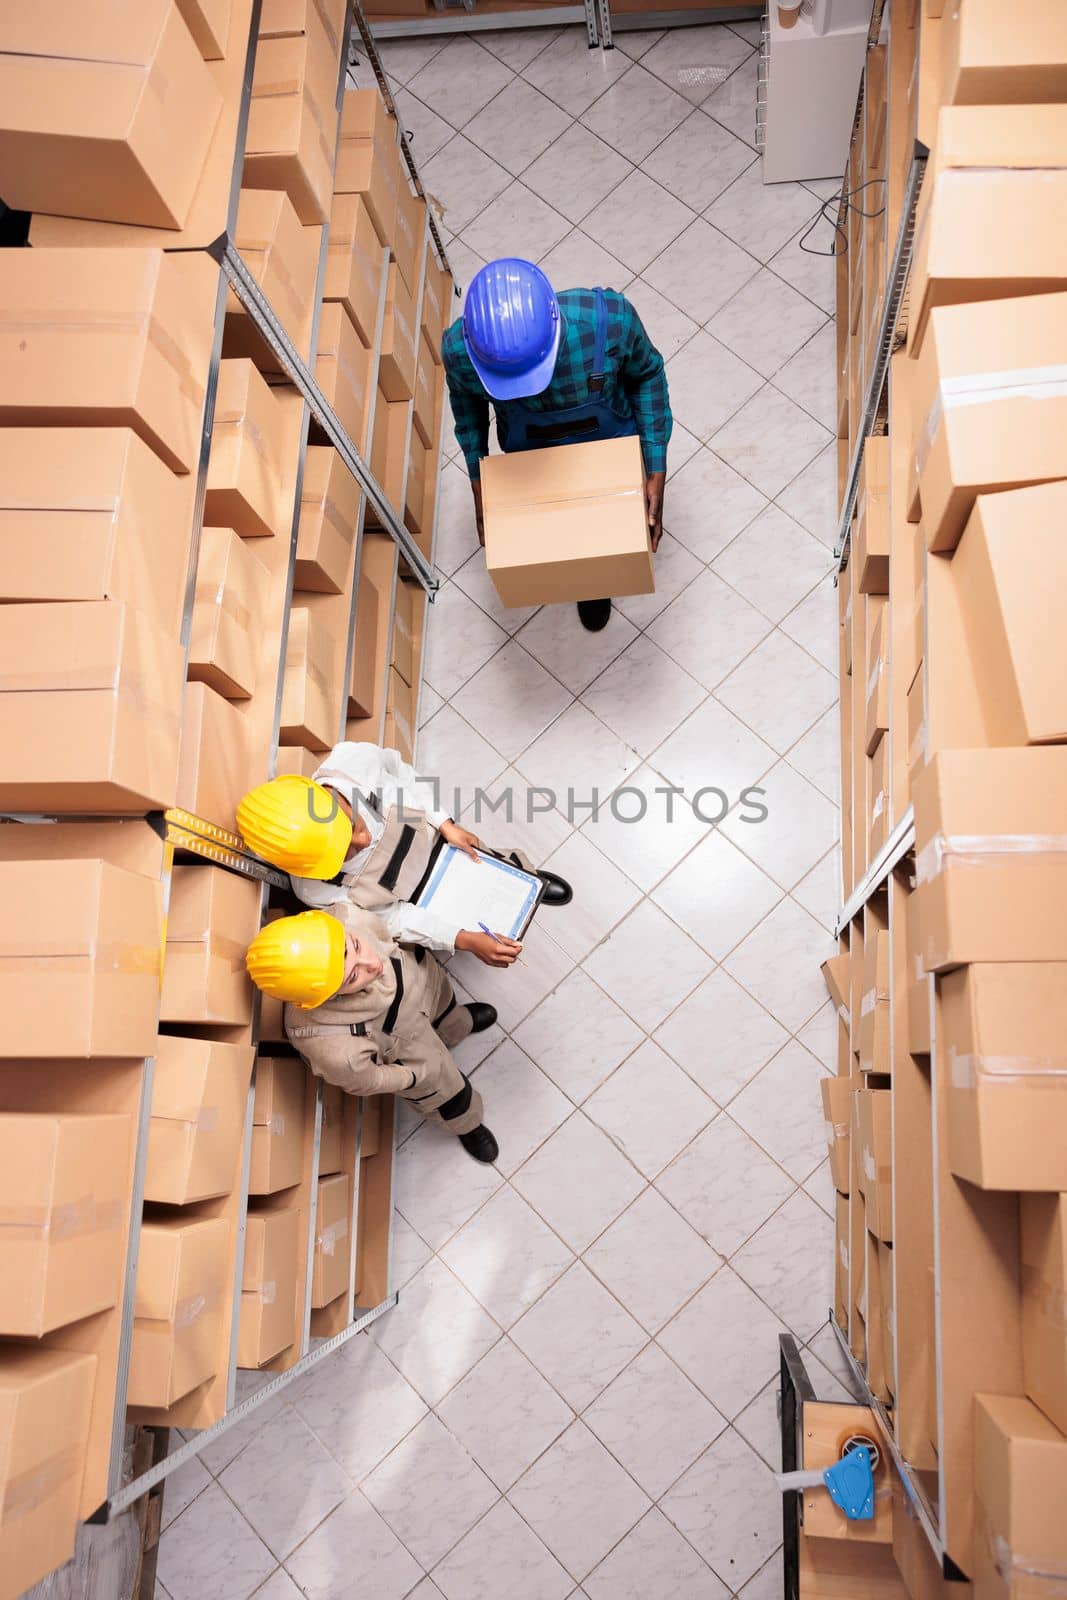 Warehouse employees managing parcels receiving, carrying cardboard box. Diverse man and women retail storehouse managers working and coordinating goods supply chain top view